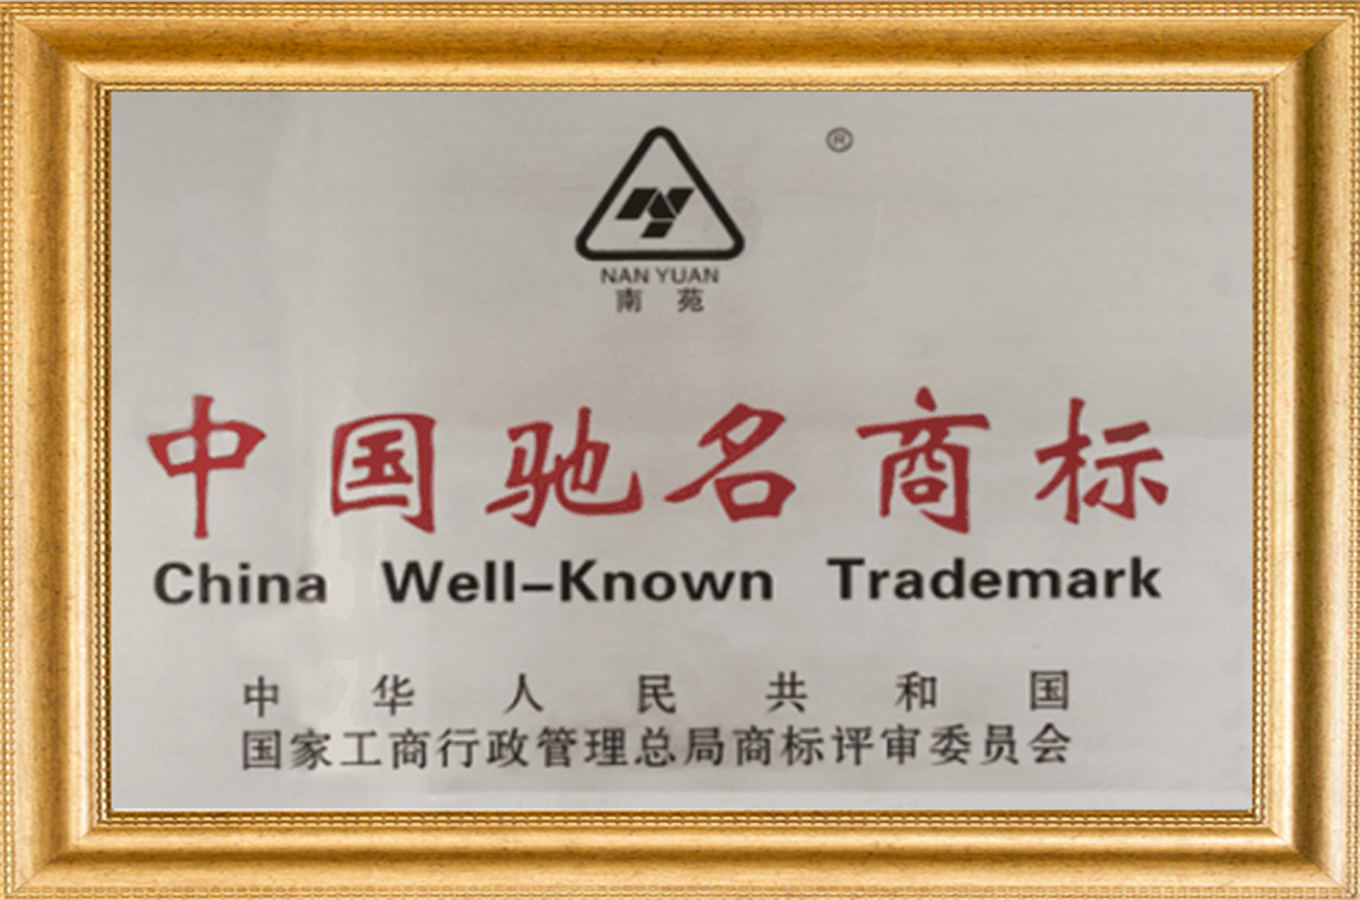 A famous Chinese trademark 